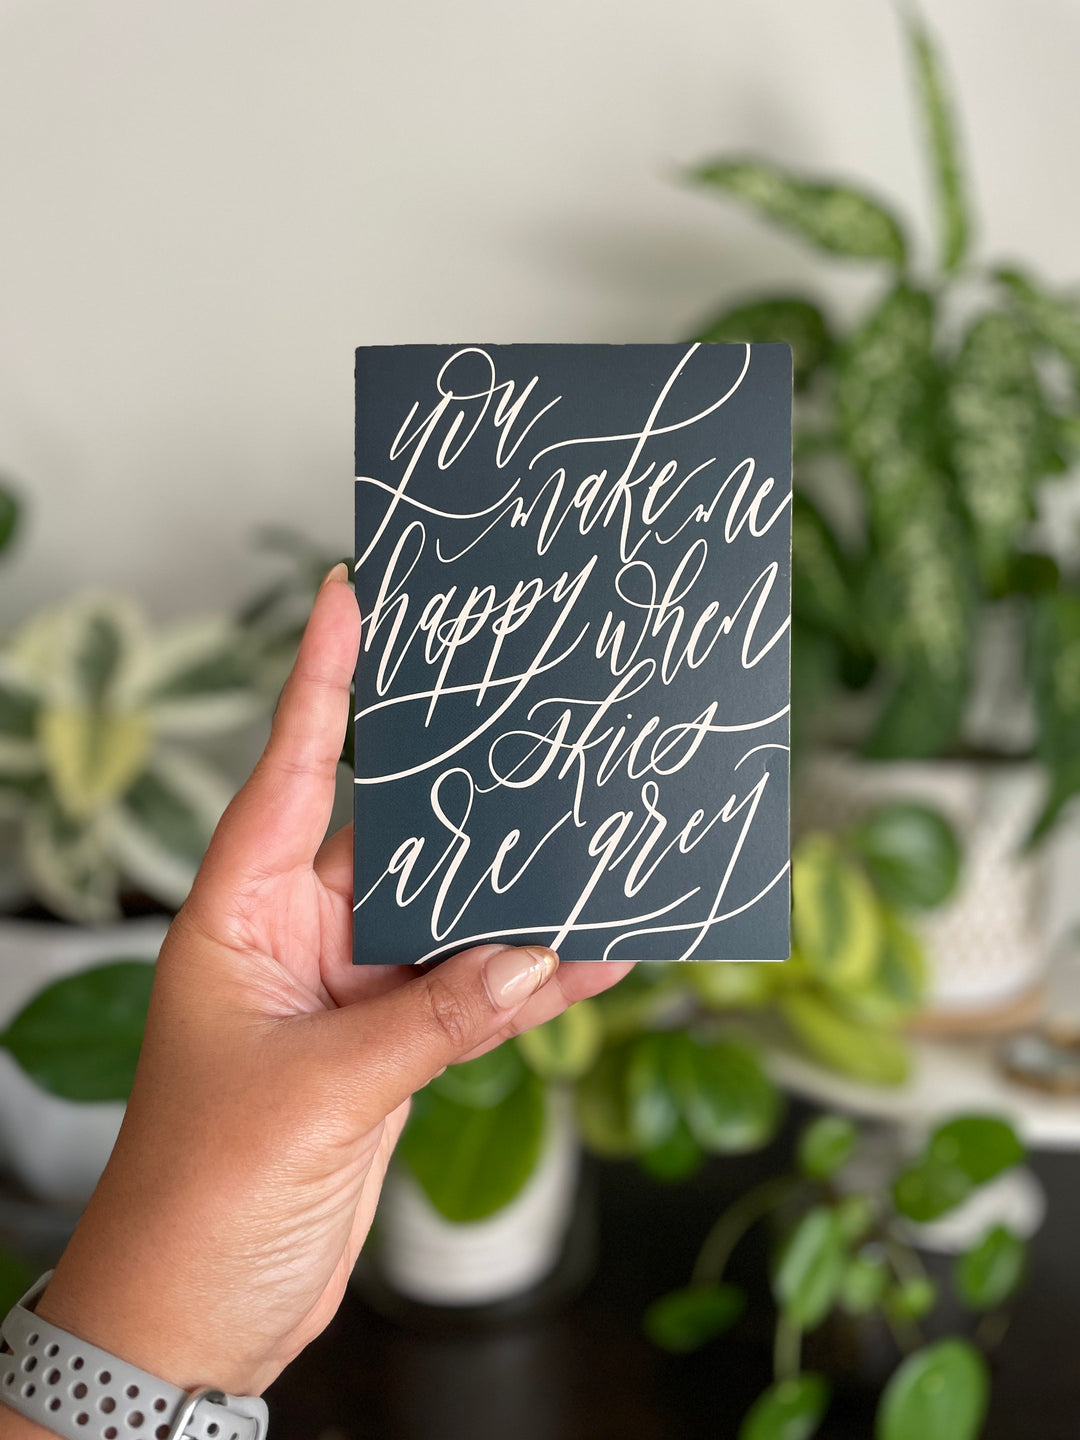 Elevate your heartfelt messages with our exquisite greeting card, where the phrase "You make me happy when skies are grey" is beautifully rendered in modern calligraphy, creating an artful expression of warmth and joy.